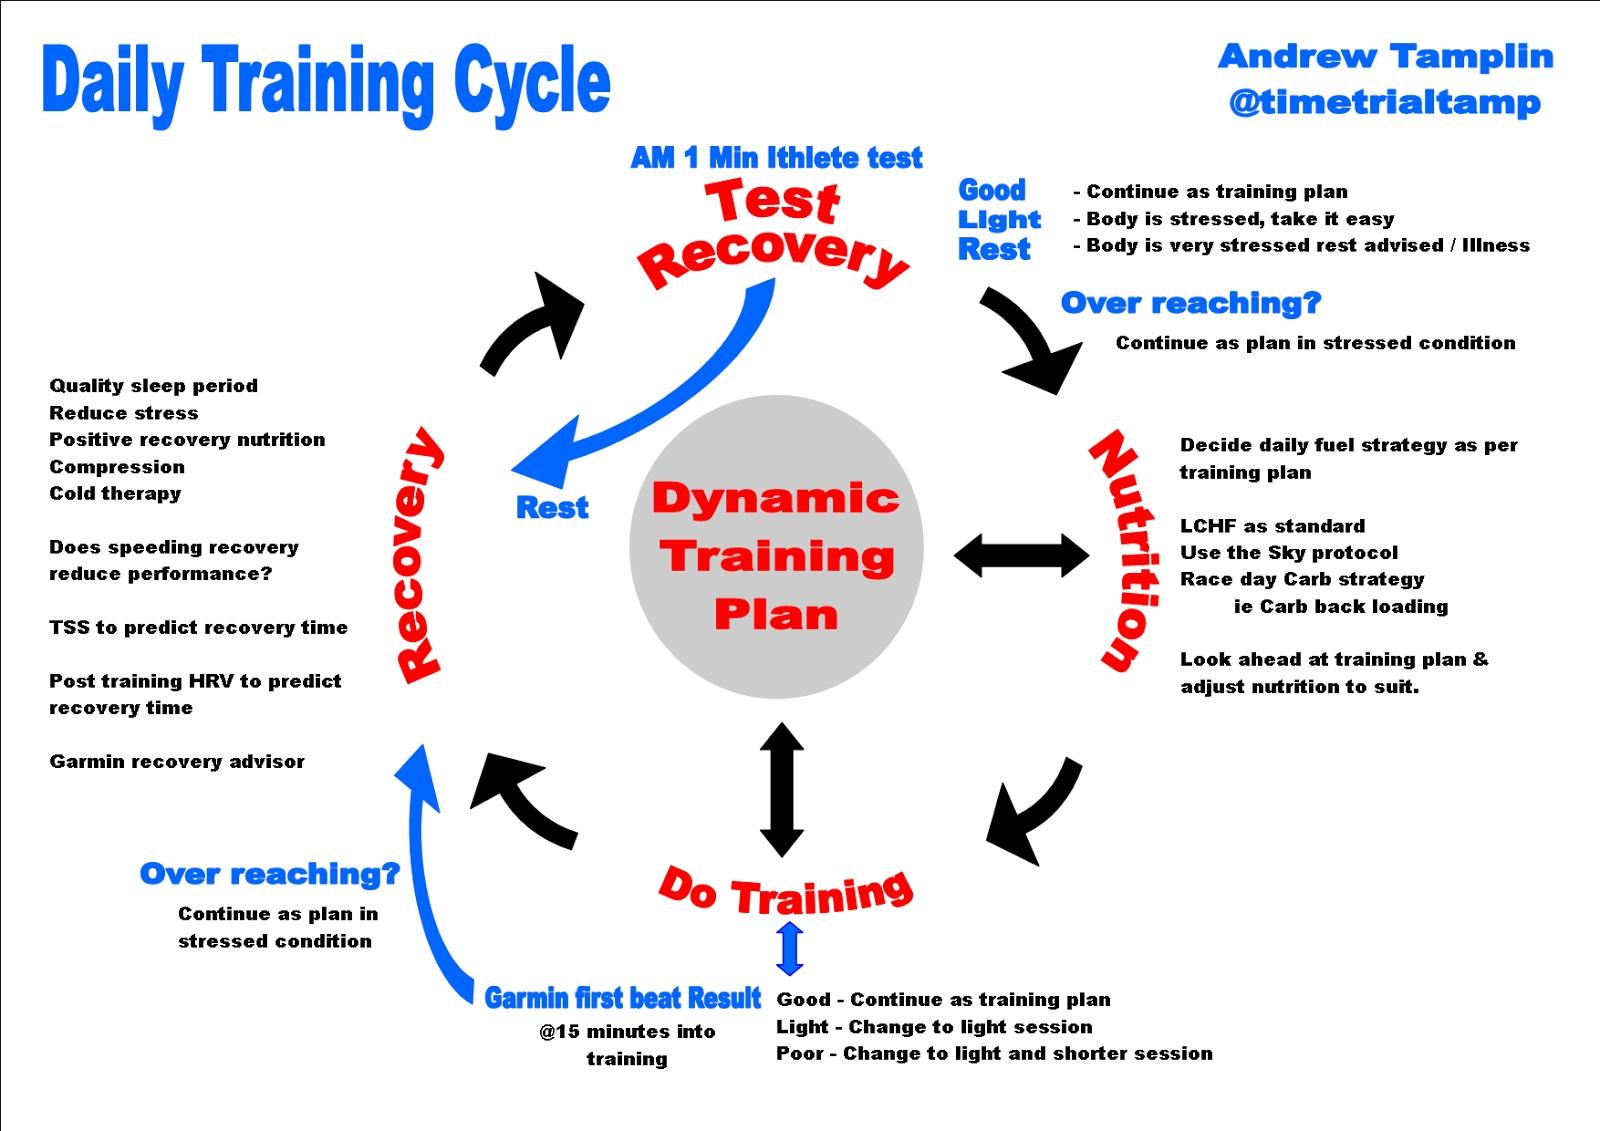 Training cycle infographic